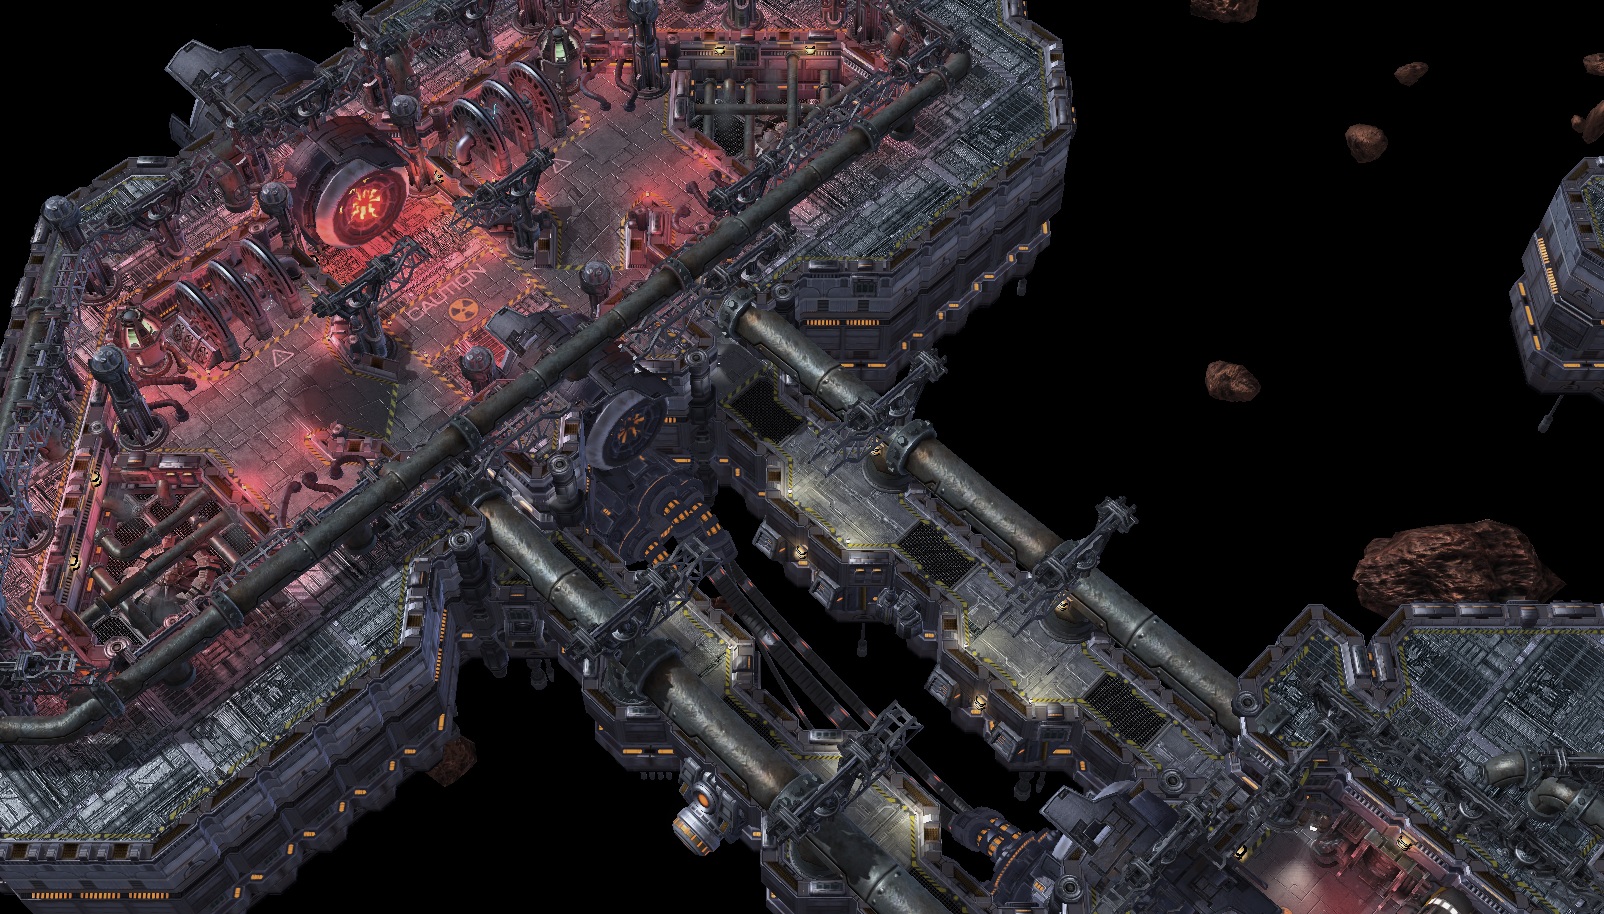 Images - Battlecruiser interior - Maps - Projects - SC2Mapster.